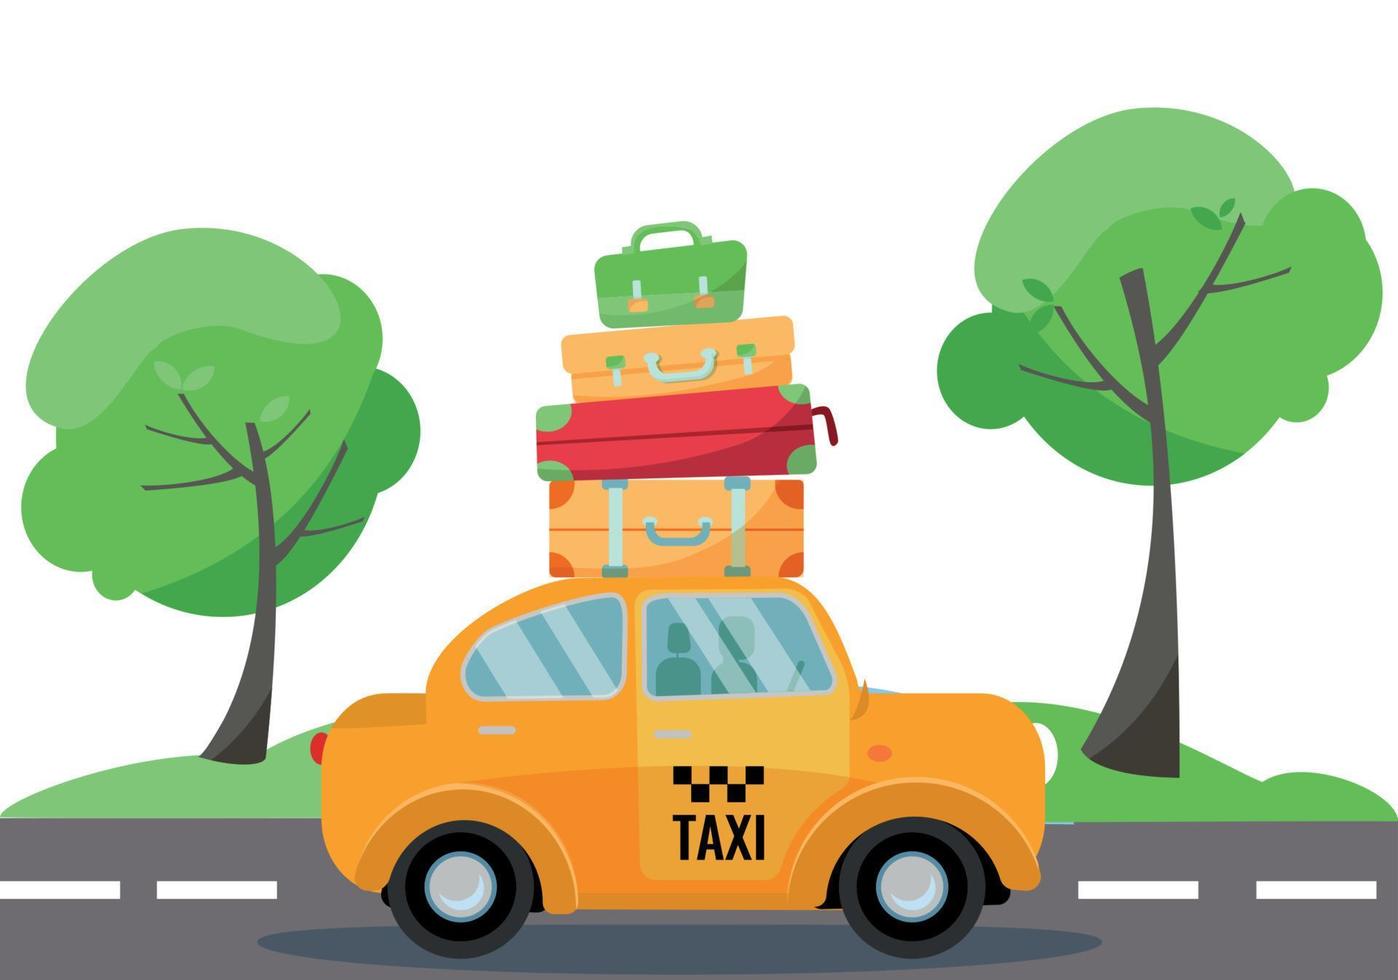 yellow taxi car with a stack of suitcases and luggage on the roof tpo drives on the road. Summer Landscape with green trees. Side view of the vehicle. Vector flat cartoon illustration